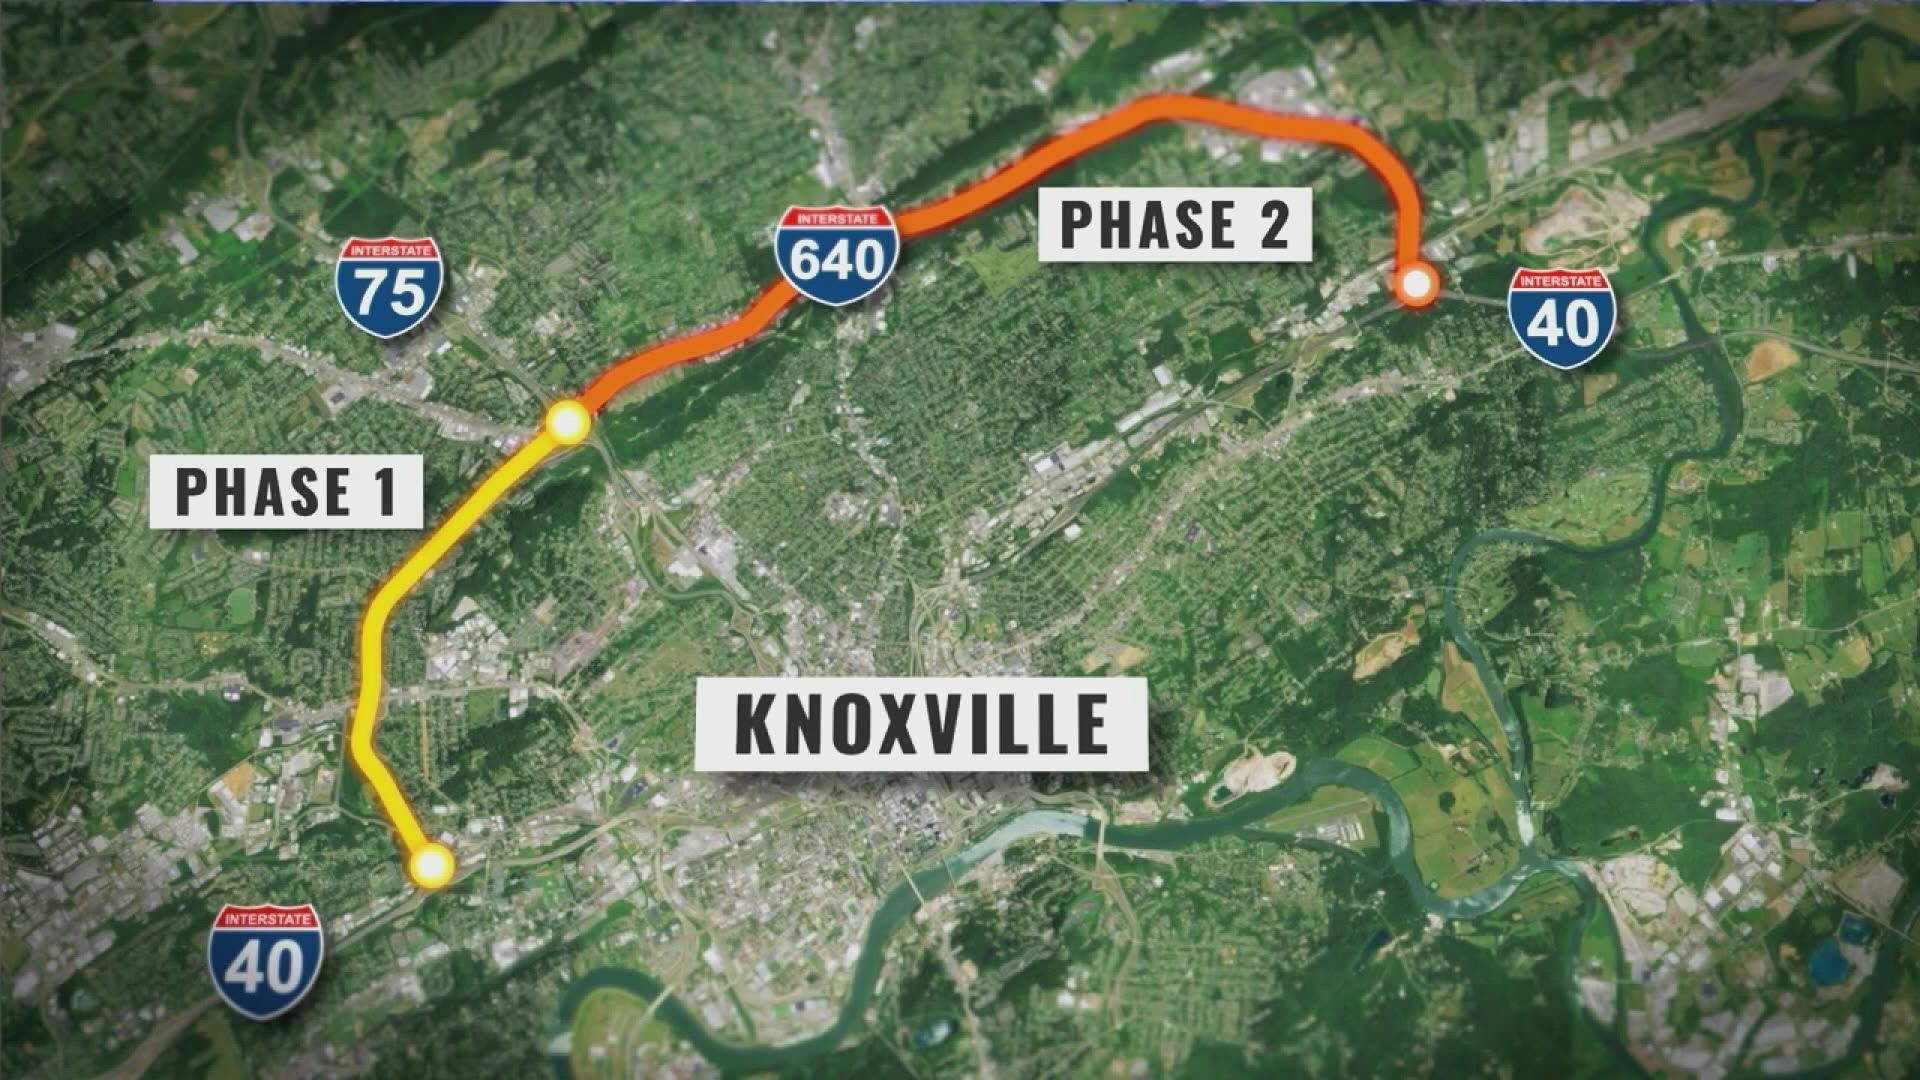 The reconstruciton project will be switching lanes from the westbound side of I-640 to the eastbound side, said TDOT.